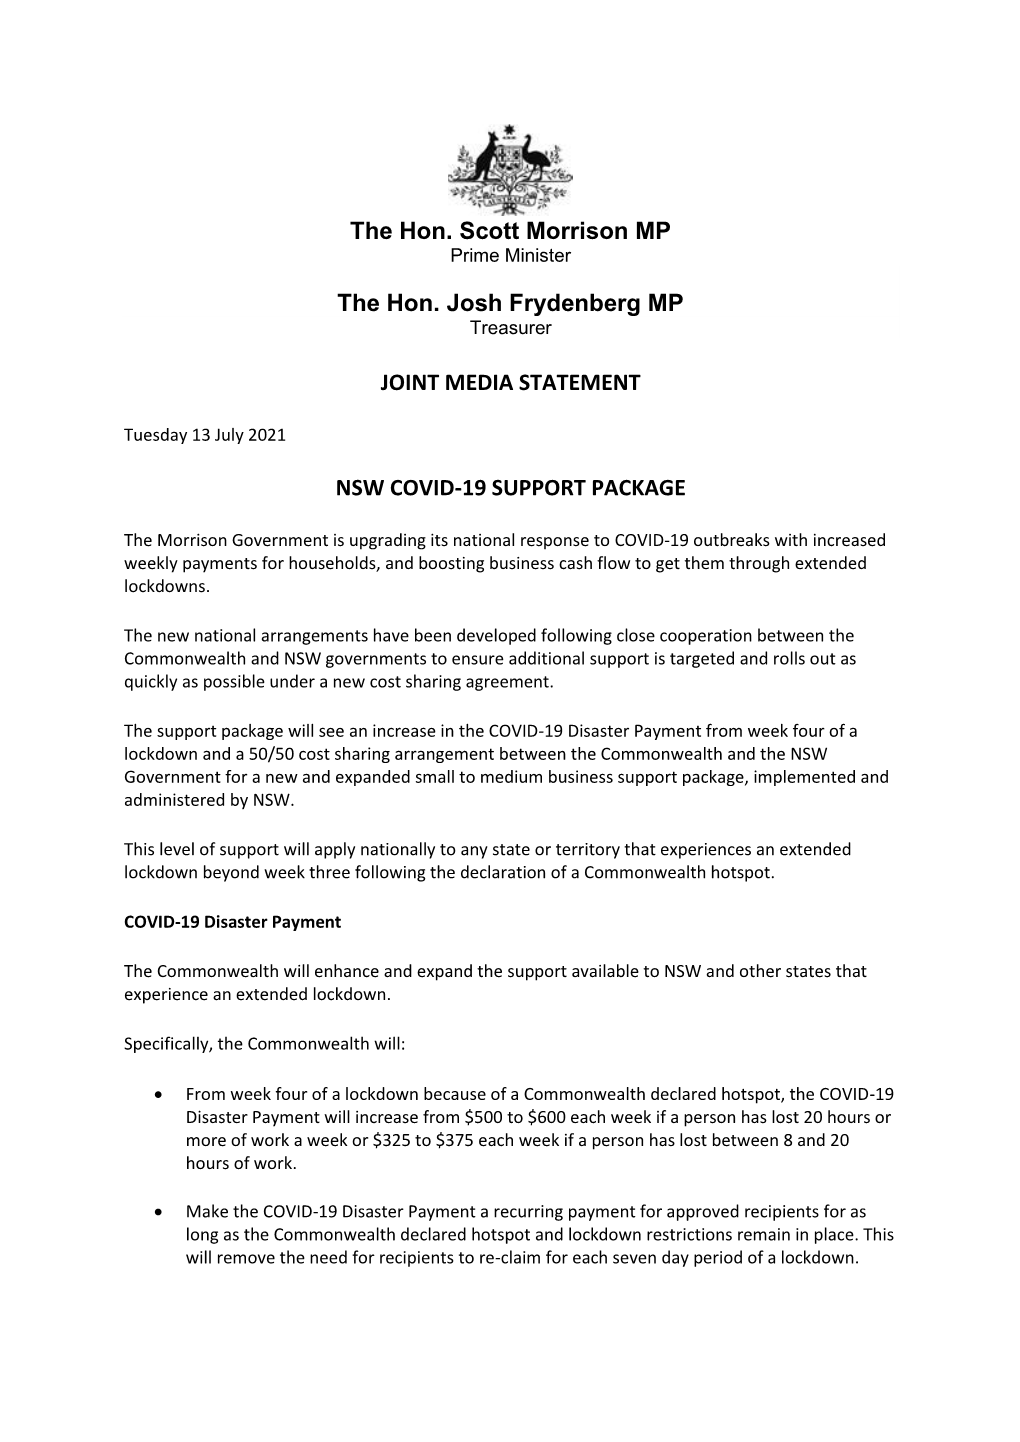 The Hon. Scott Morrison MP the Hon. Josh Frydenberg MP JOINT MEDIA STATEMENT NSW COVID-19 SUPPORT PACKAGE